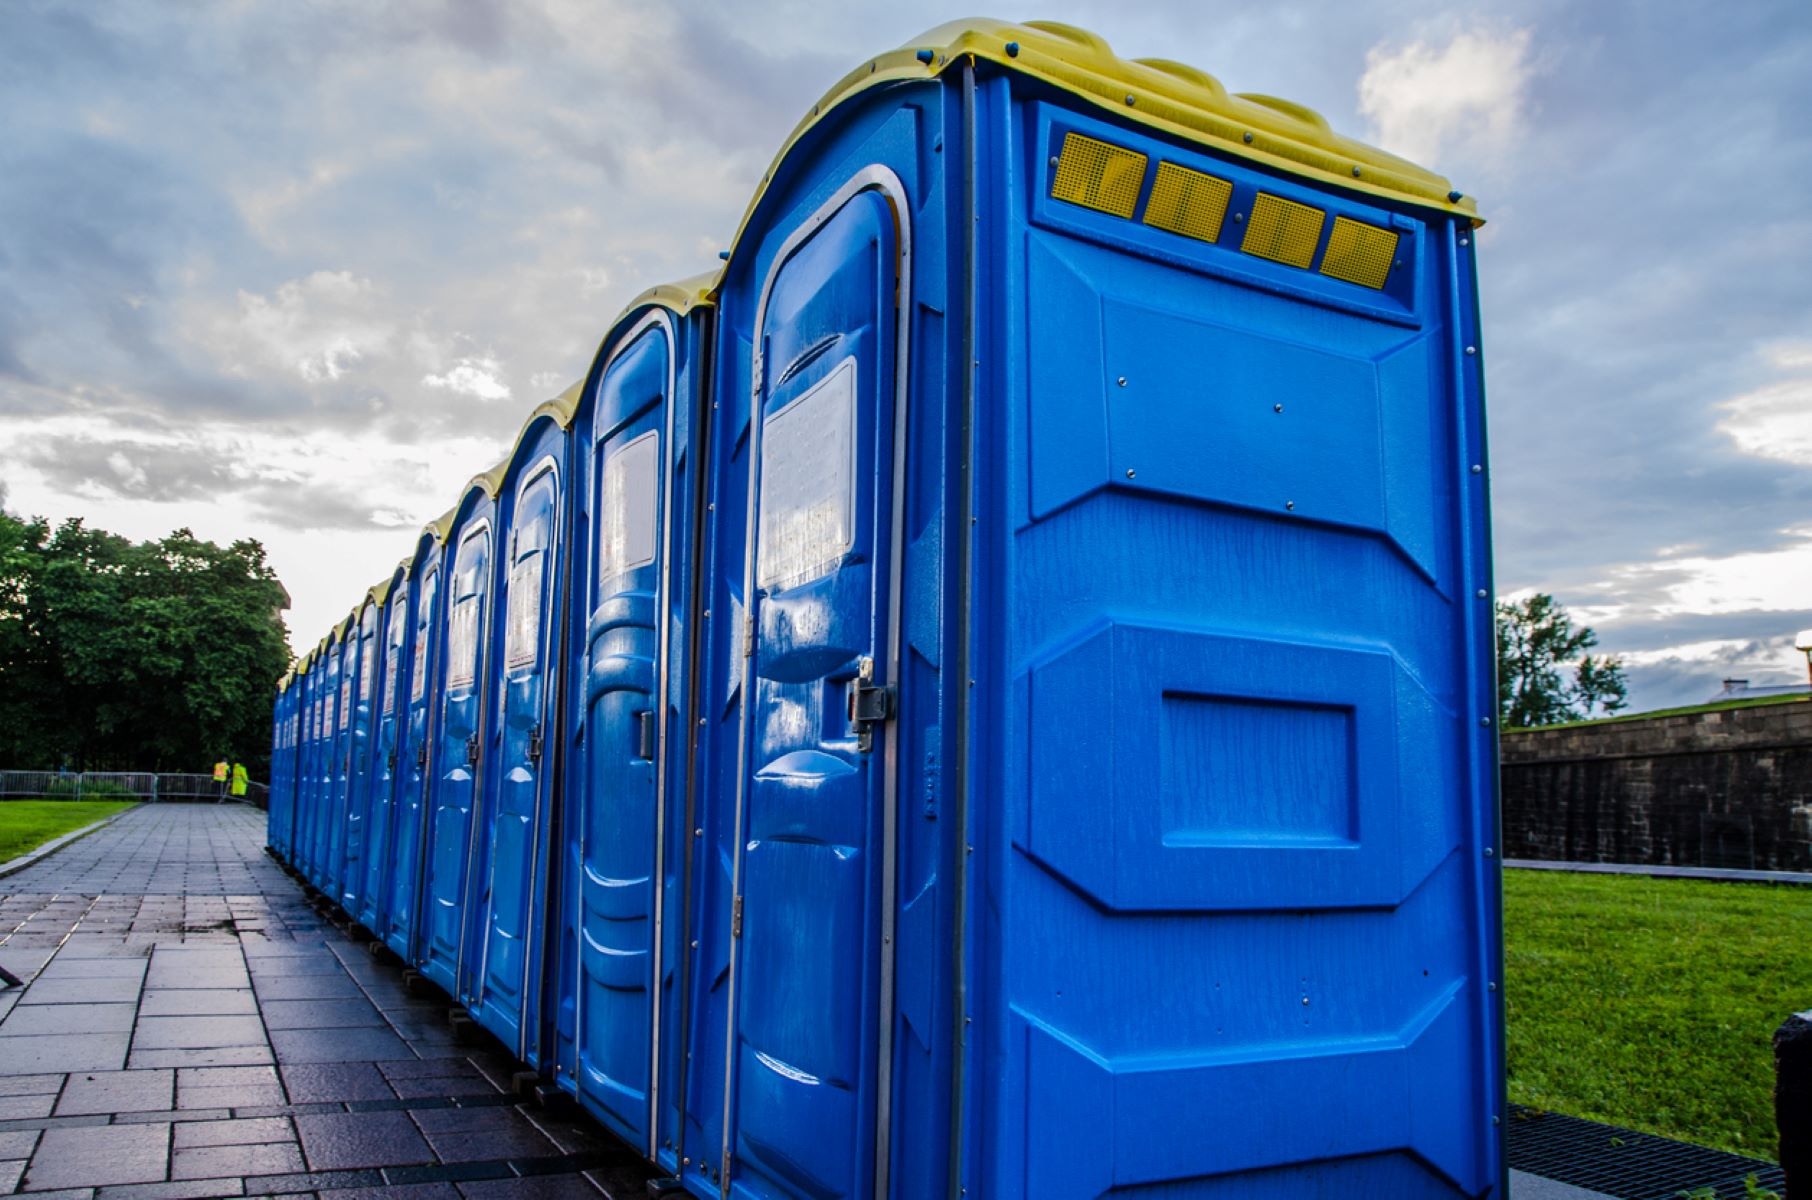 Why Shouldn’t I Add Deodorizer To Holding Tank On Portable Toilet